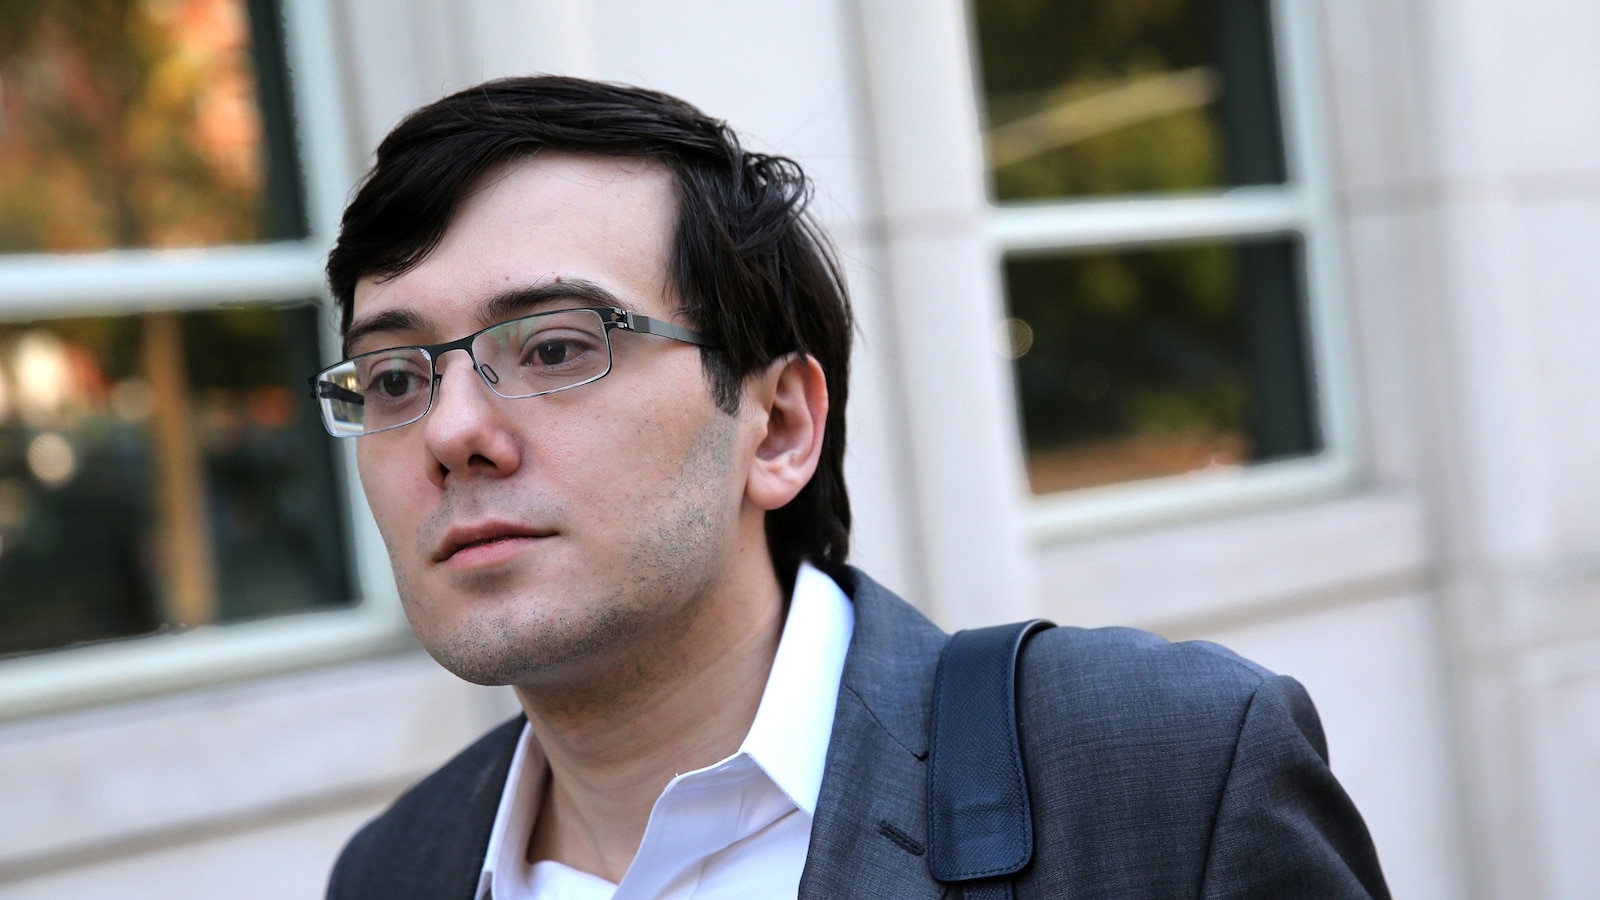 Judge affirms Martin Shkreli's prohibition from the pharmaceutical industry